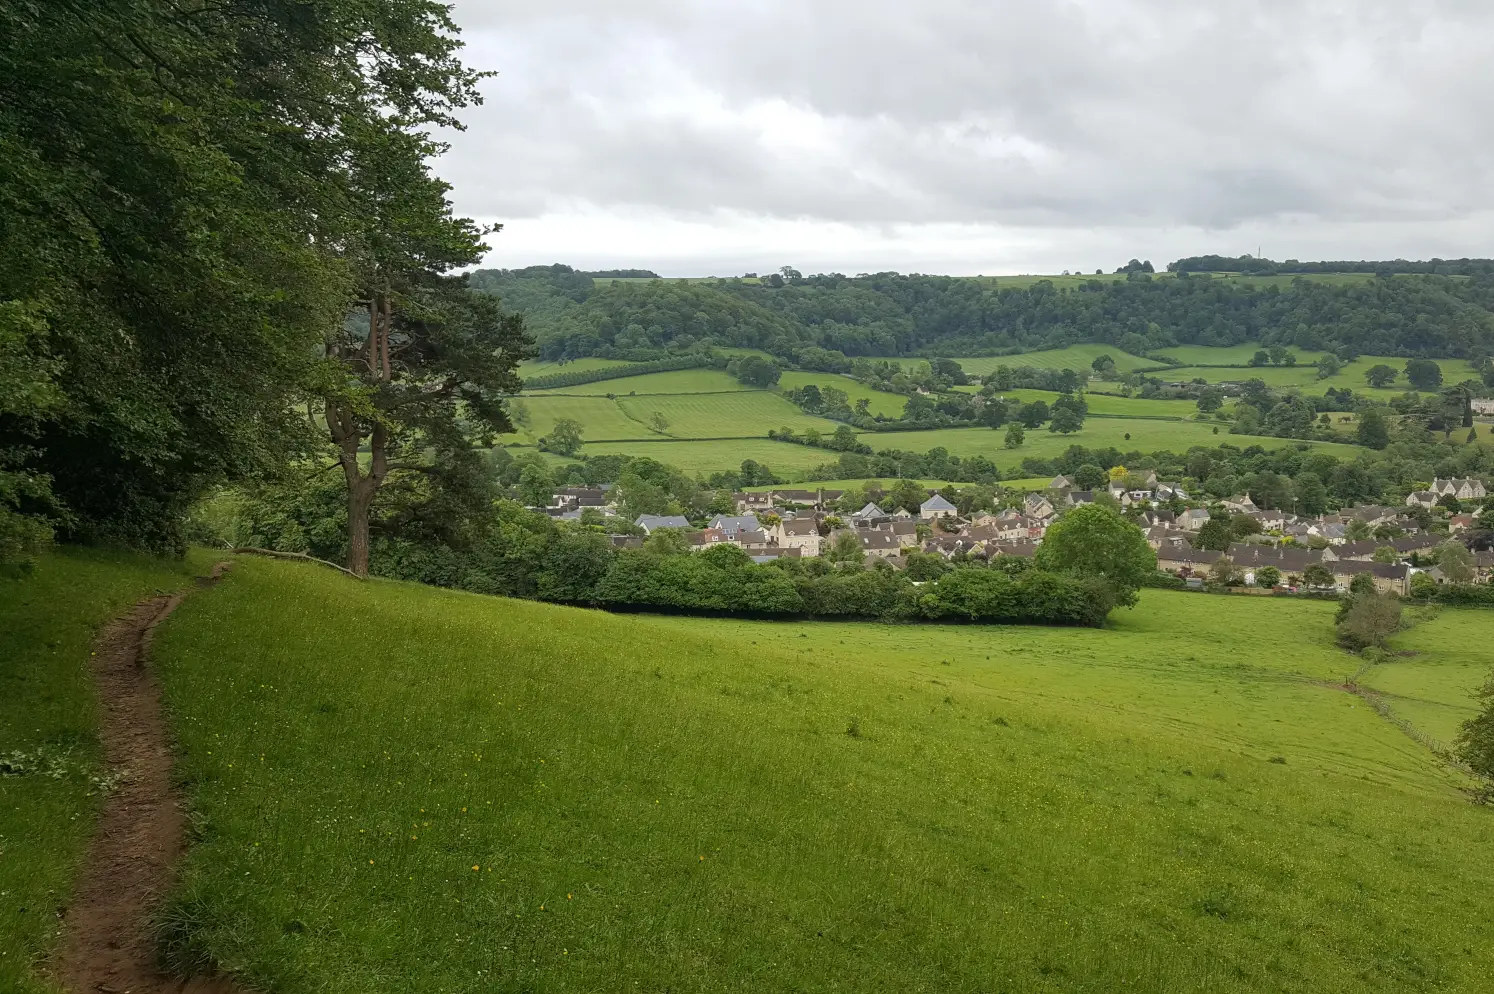 Views of Uley village nested in Cotswold valley